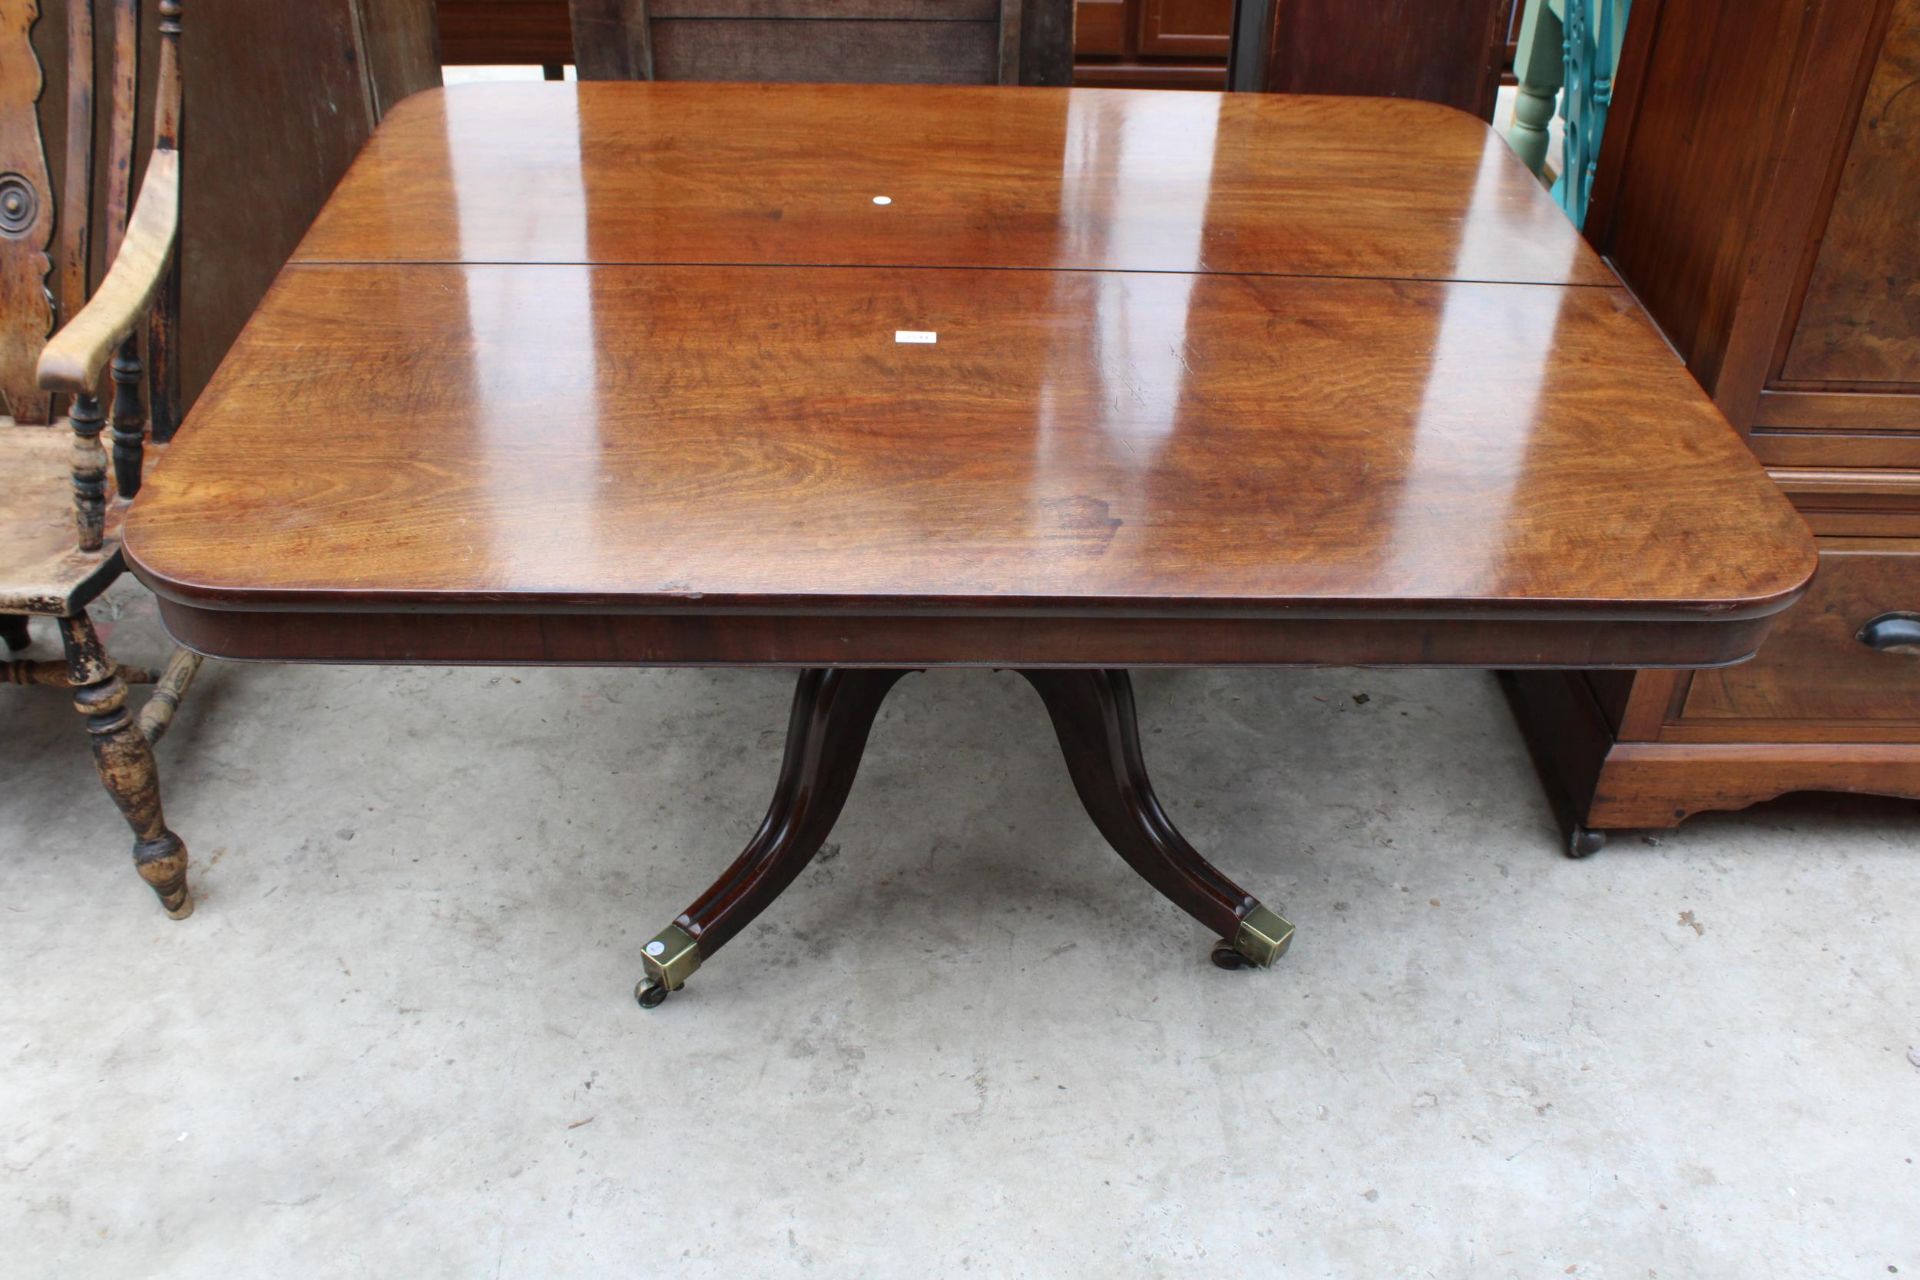 A REGENCY STYLE MAHOGANY PEDESTAL TILT-TOP DINING TABLE 56" X 46.5" WITH BRASS FEET AND CASTERS